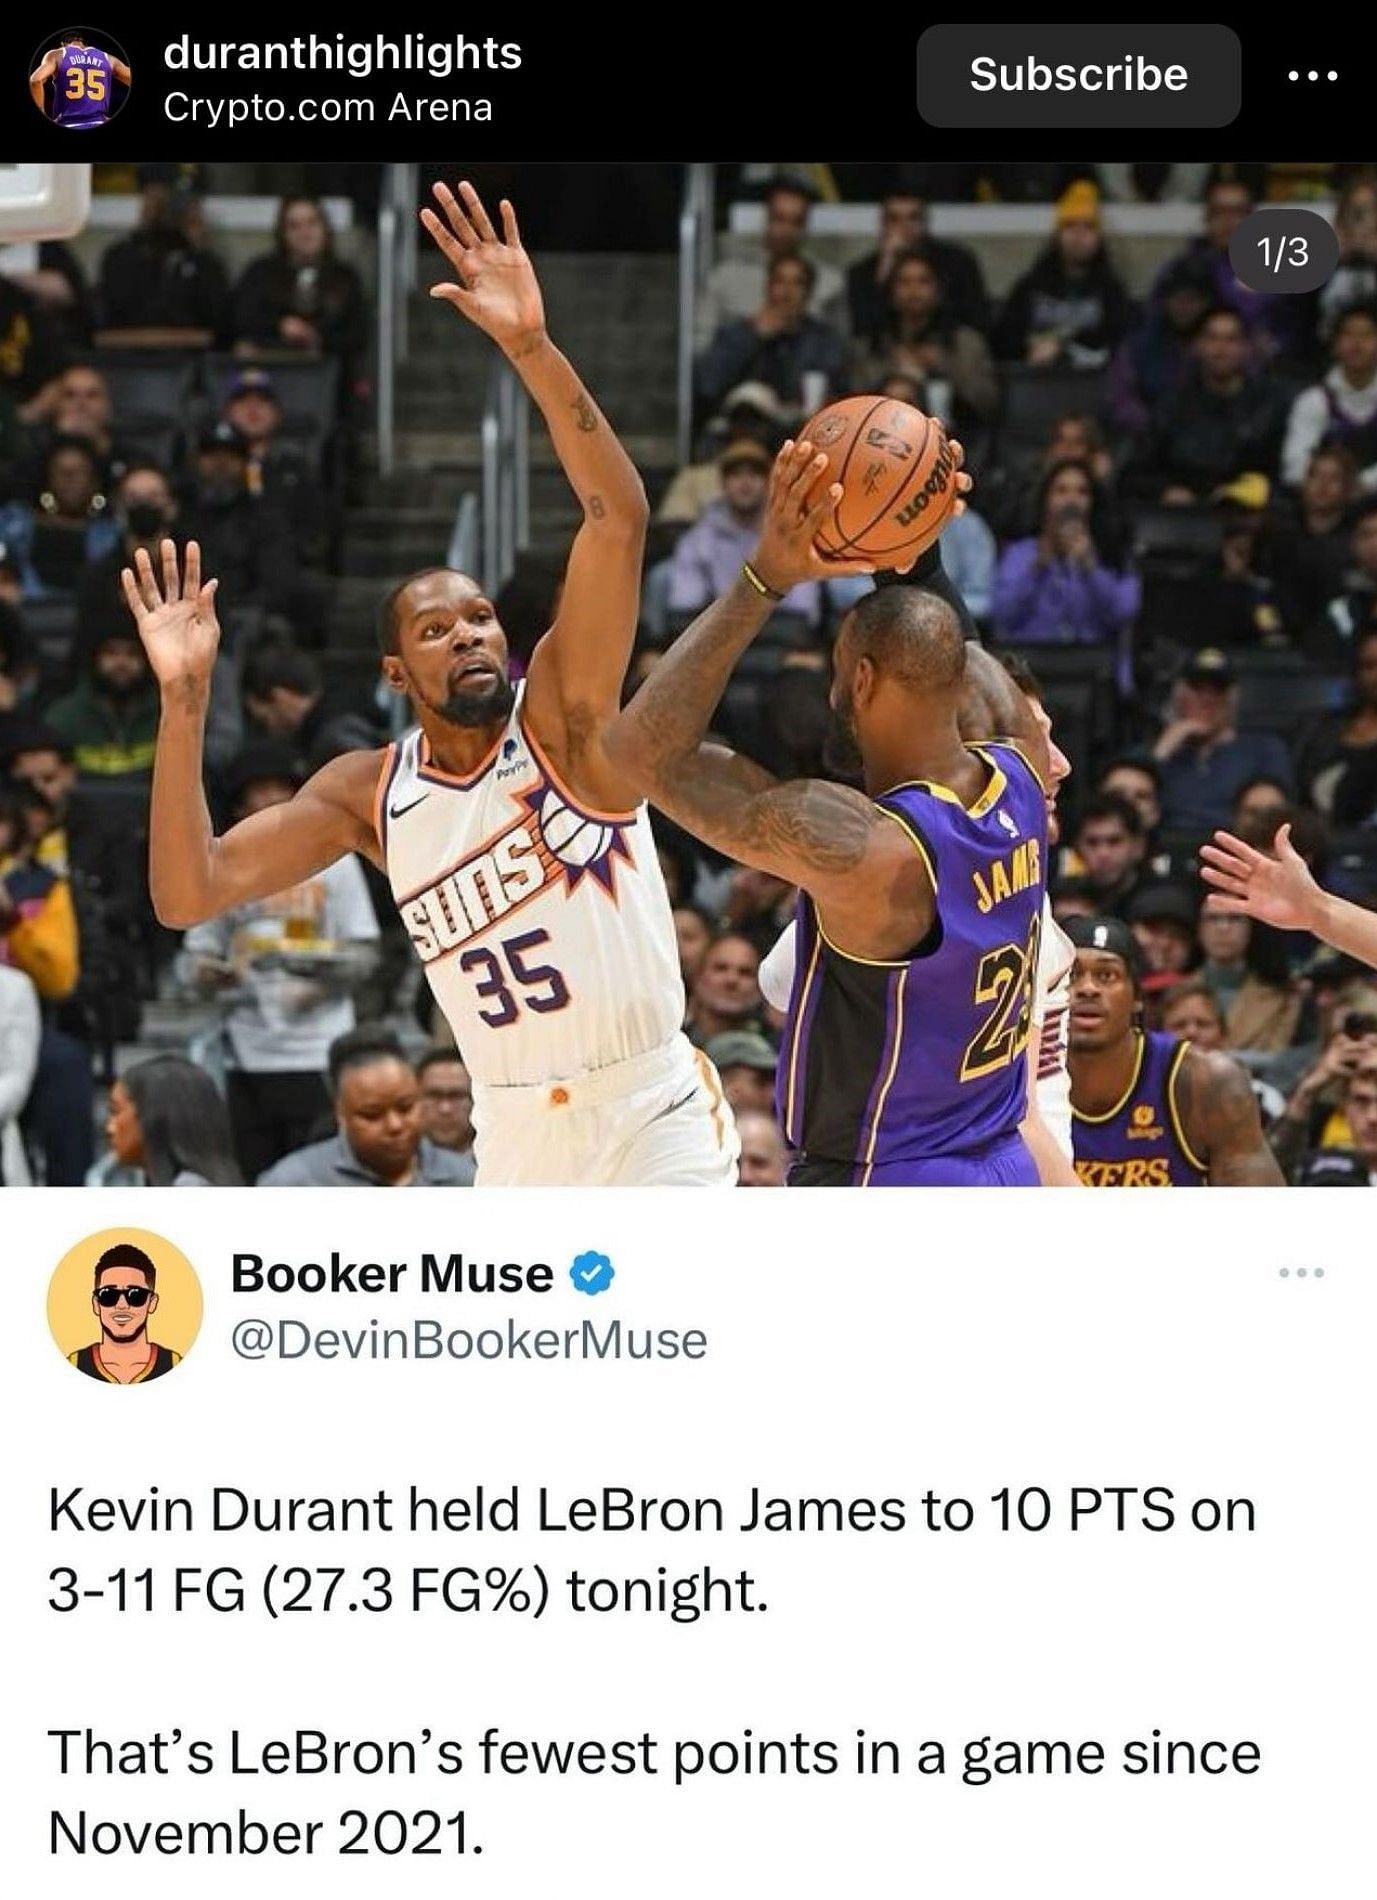 Kevin Durant limited LeBron James in their last game.